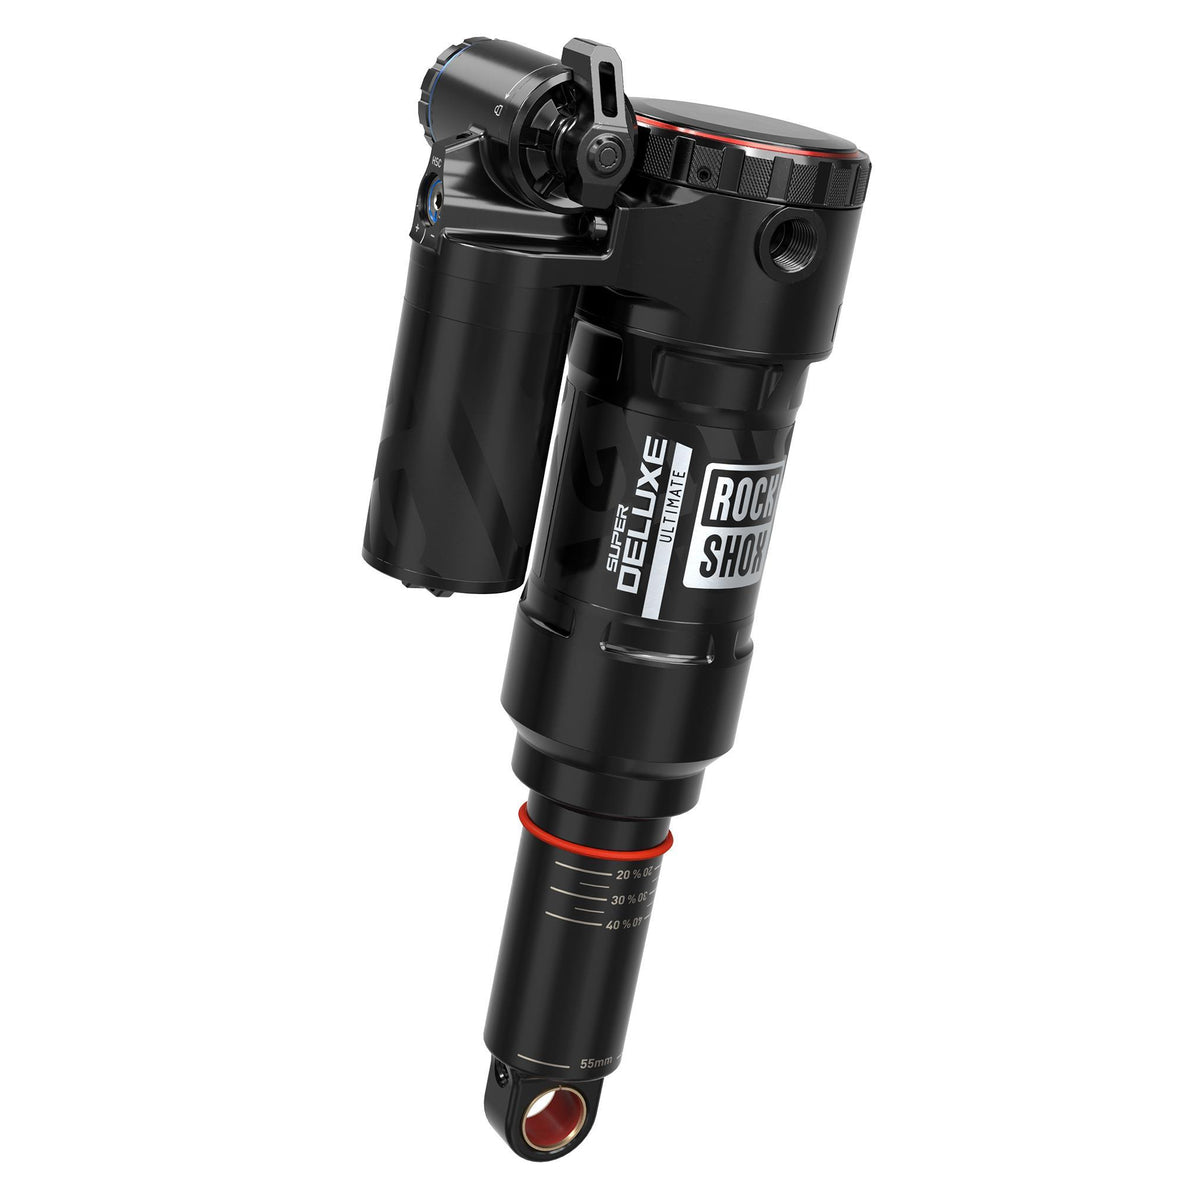 Rockshox Super Deluxe Ultimate Rear Shock RC2T - Linear Air, 0 Neg/ 1 Pos Tokens, Linearreb/Lccomp, 380LB Lockout, Hydraulic Bottom Out, Trunnion Standard C1 Evil Offering 2019+ Black 185X55